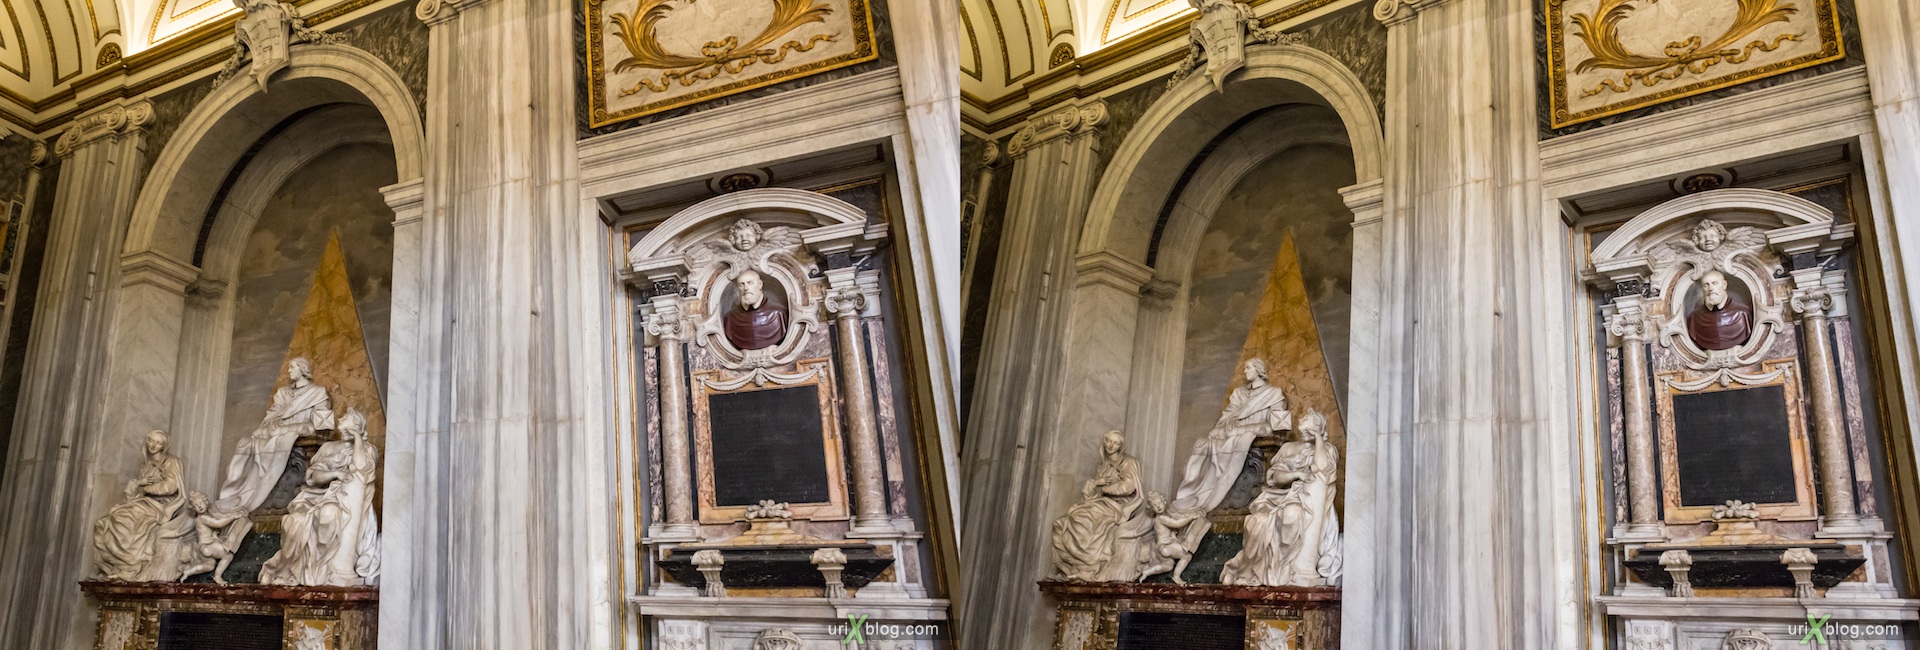 2012, basilica di Santa Maria Maggiore, church, Rome, Italy, cathedral, monastery, Christianity, Catholicism, 3D, stereo pair, cross-eyed, crossview, cross view stereo pair